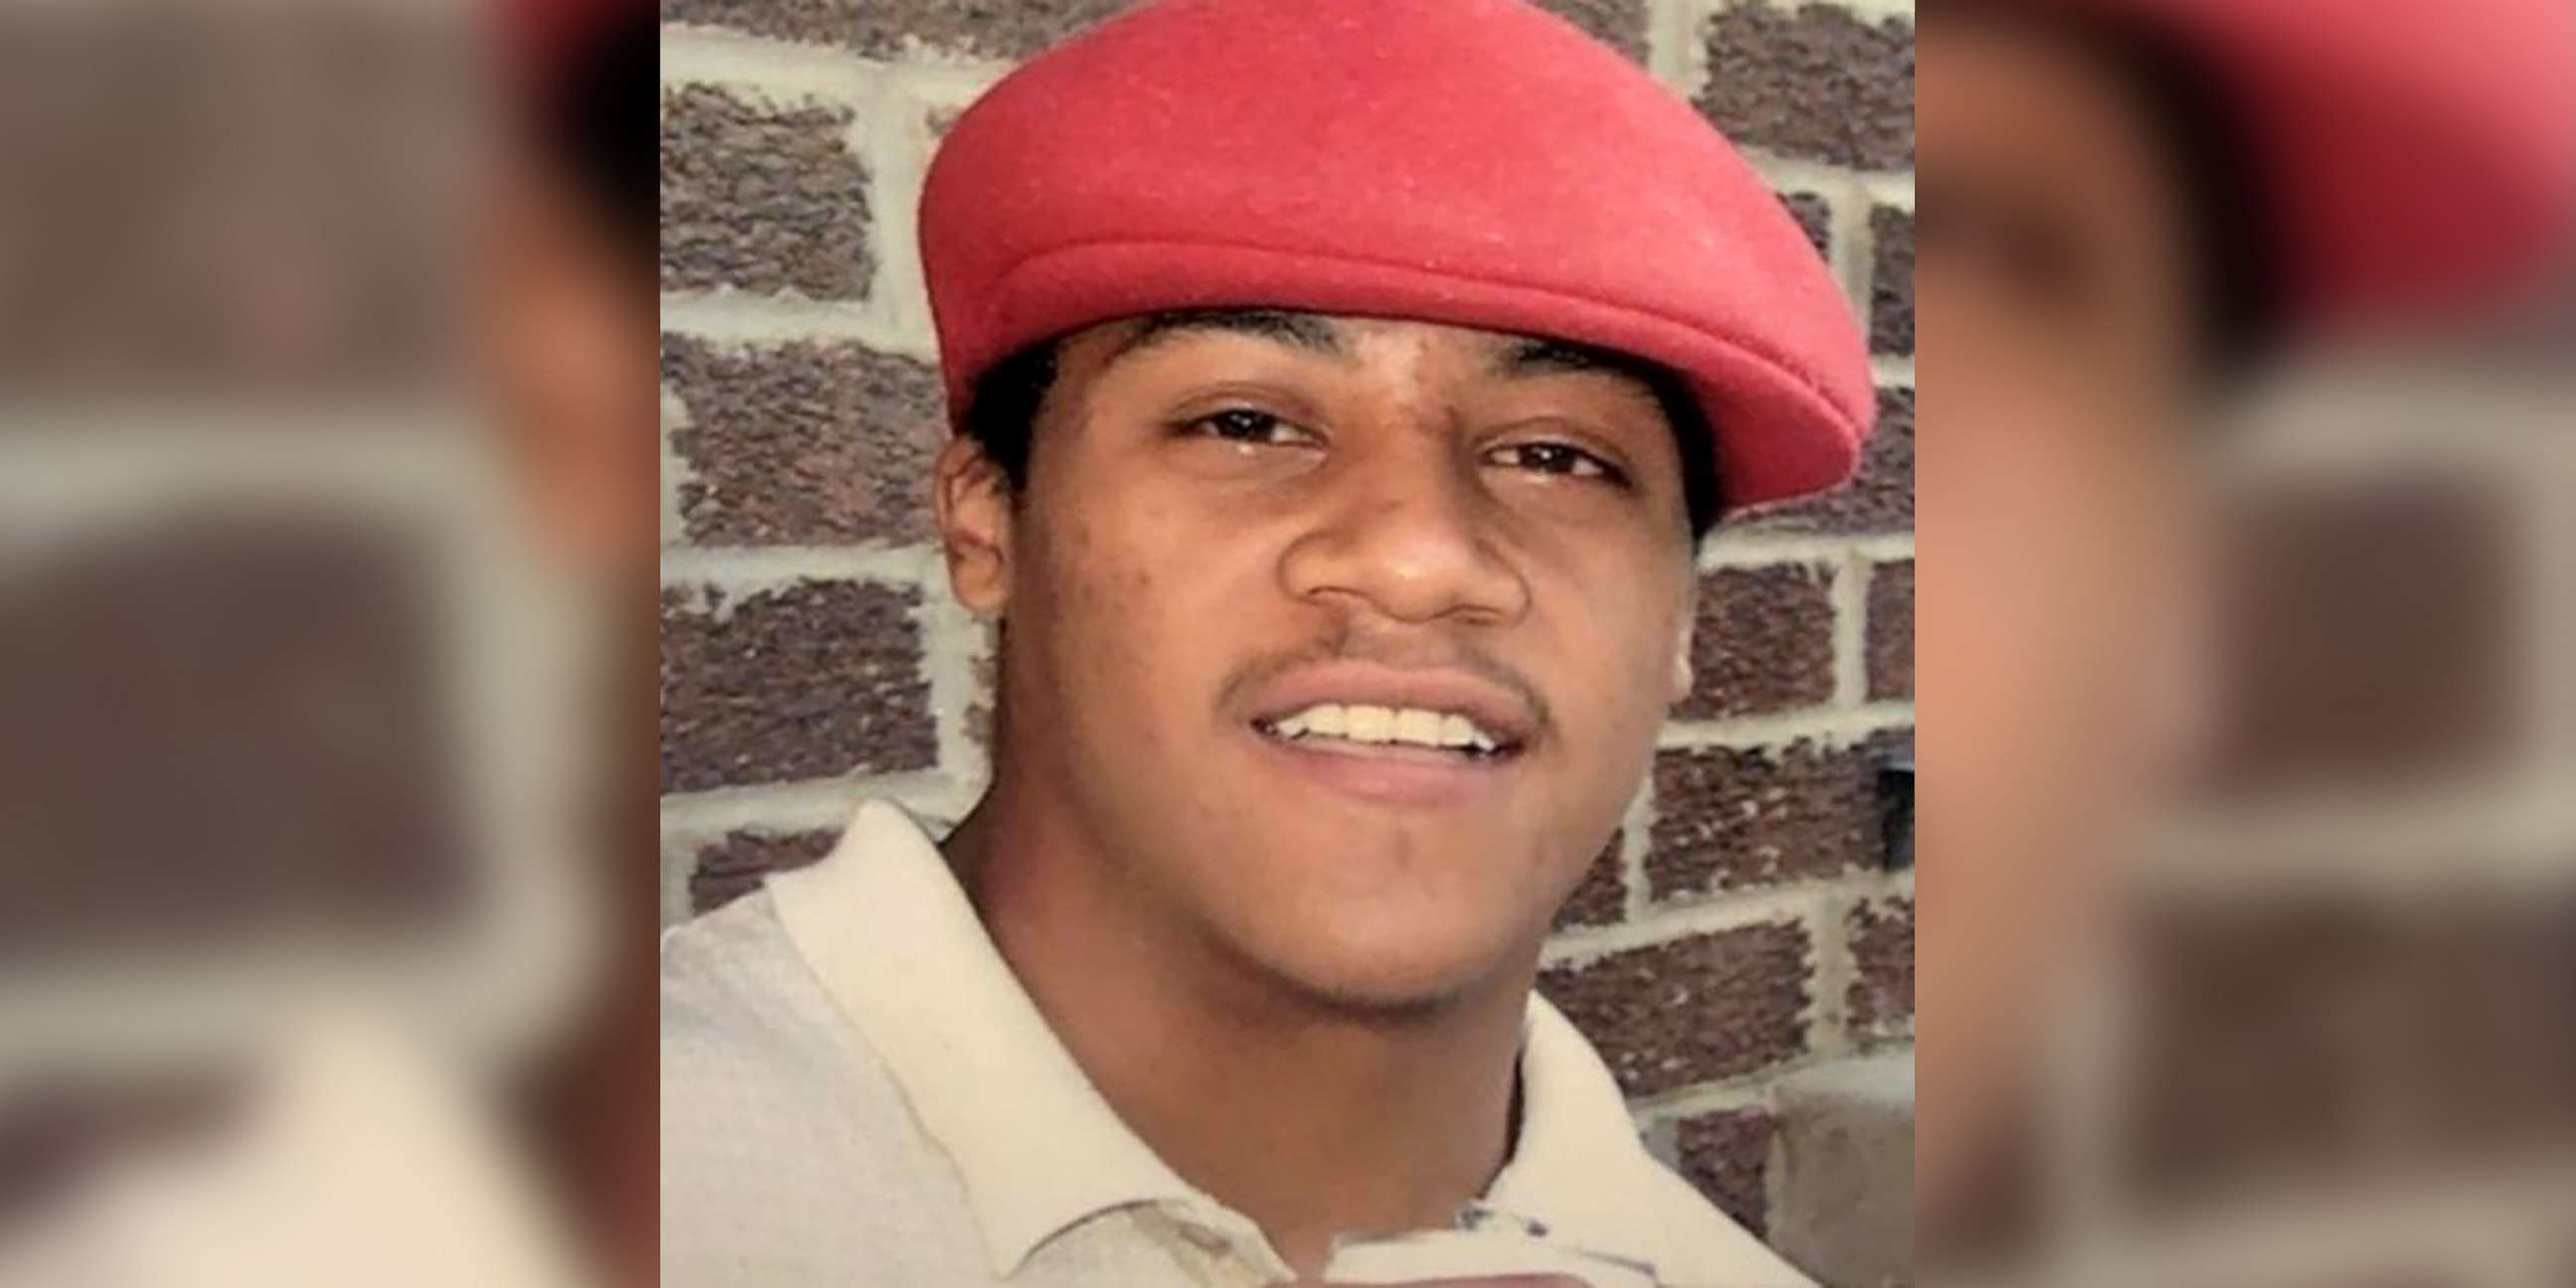 PHOTO: FBI in Kansas are re-investigating the mysterious 2004 death of Alonzo Brooks that may have been a hate crime.